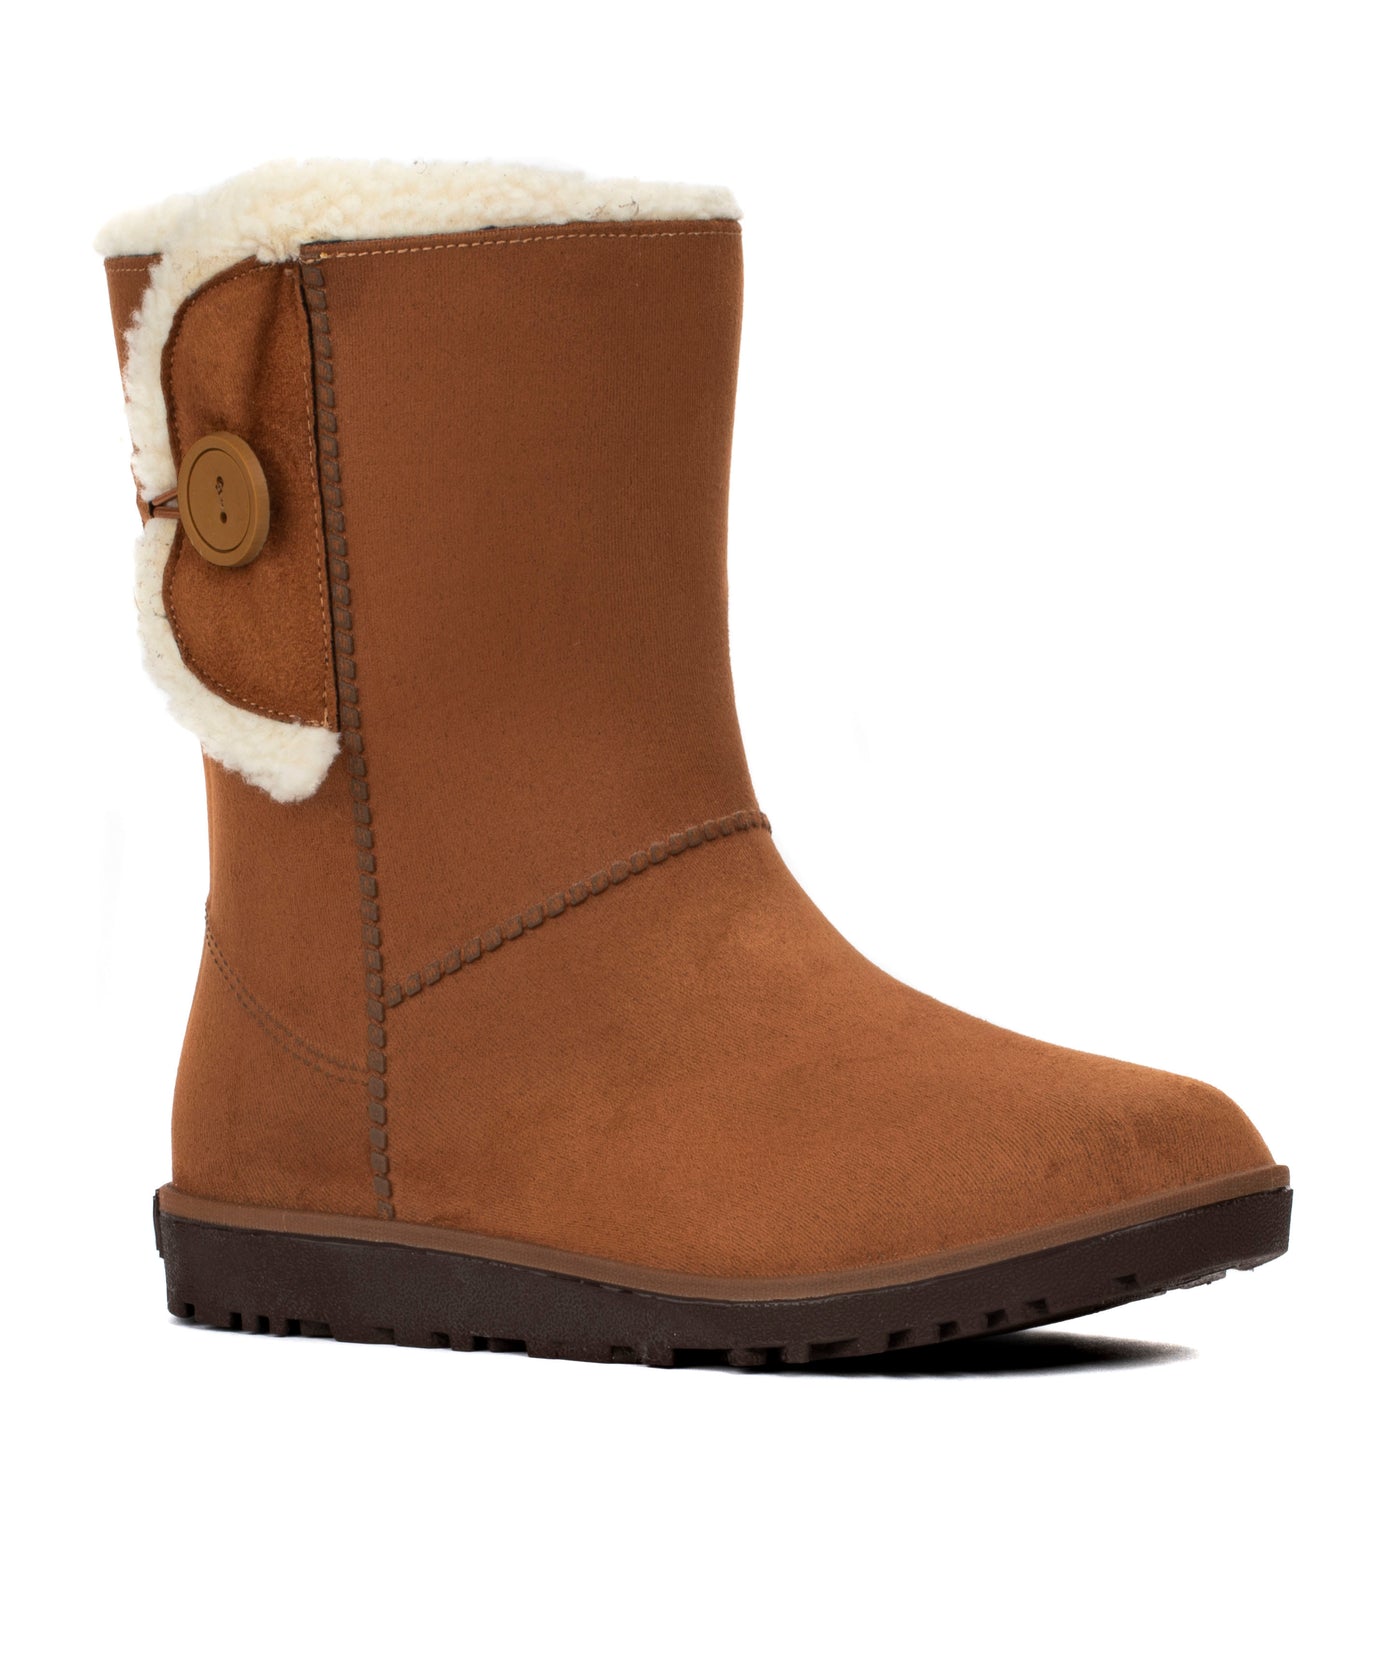 womens boot winter, womens ankle boot, winter boot, womens boot wide calf, best winter boot for women, best winter boot, waterproof winter boot, womens boot size 11, womens boot size 12, womens boot size 13, winter boot styles, best winter boot for hiking, winter boot fashion, 